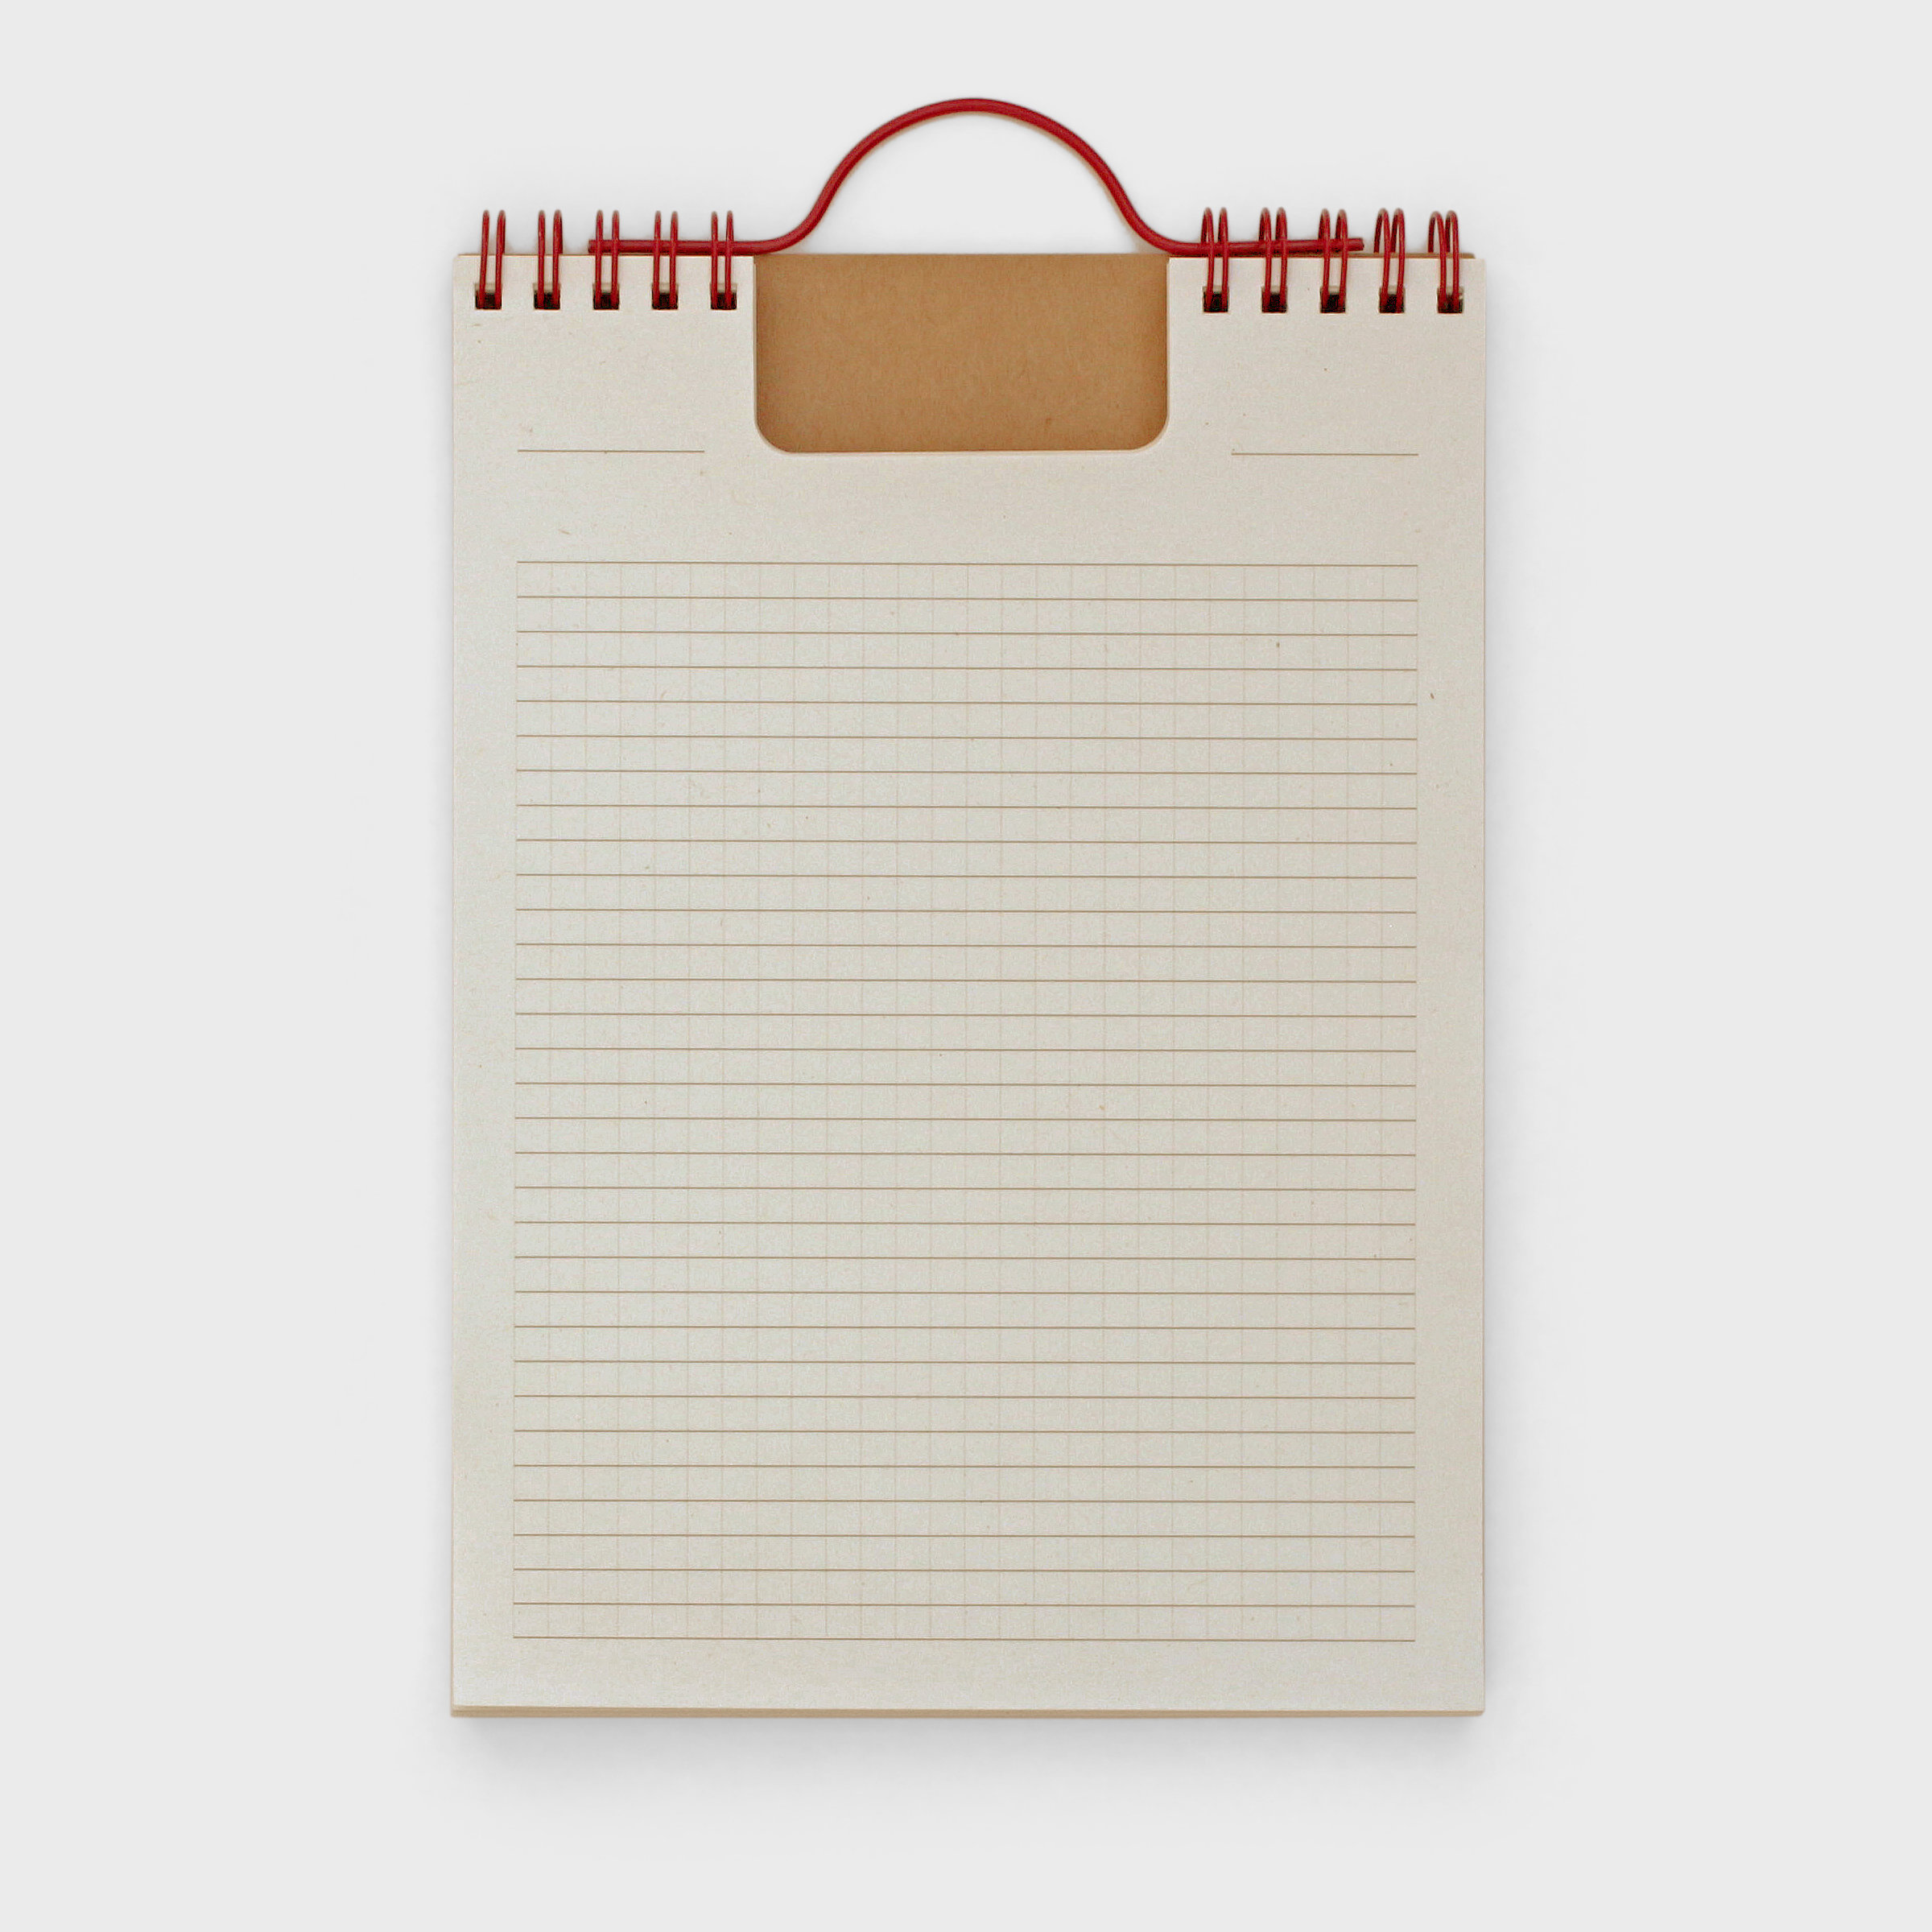 Lined and Grid Paper in one A5 Recycled Notebook